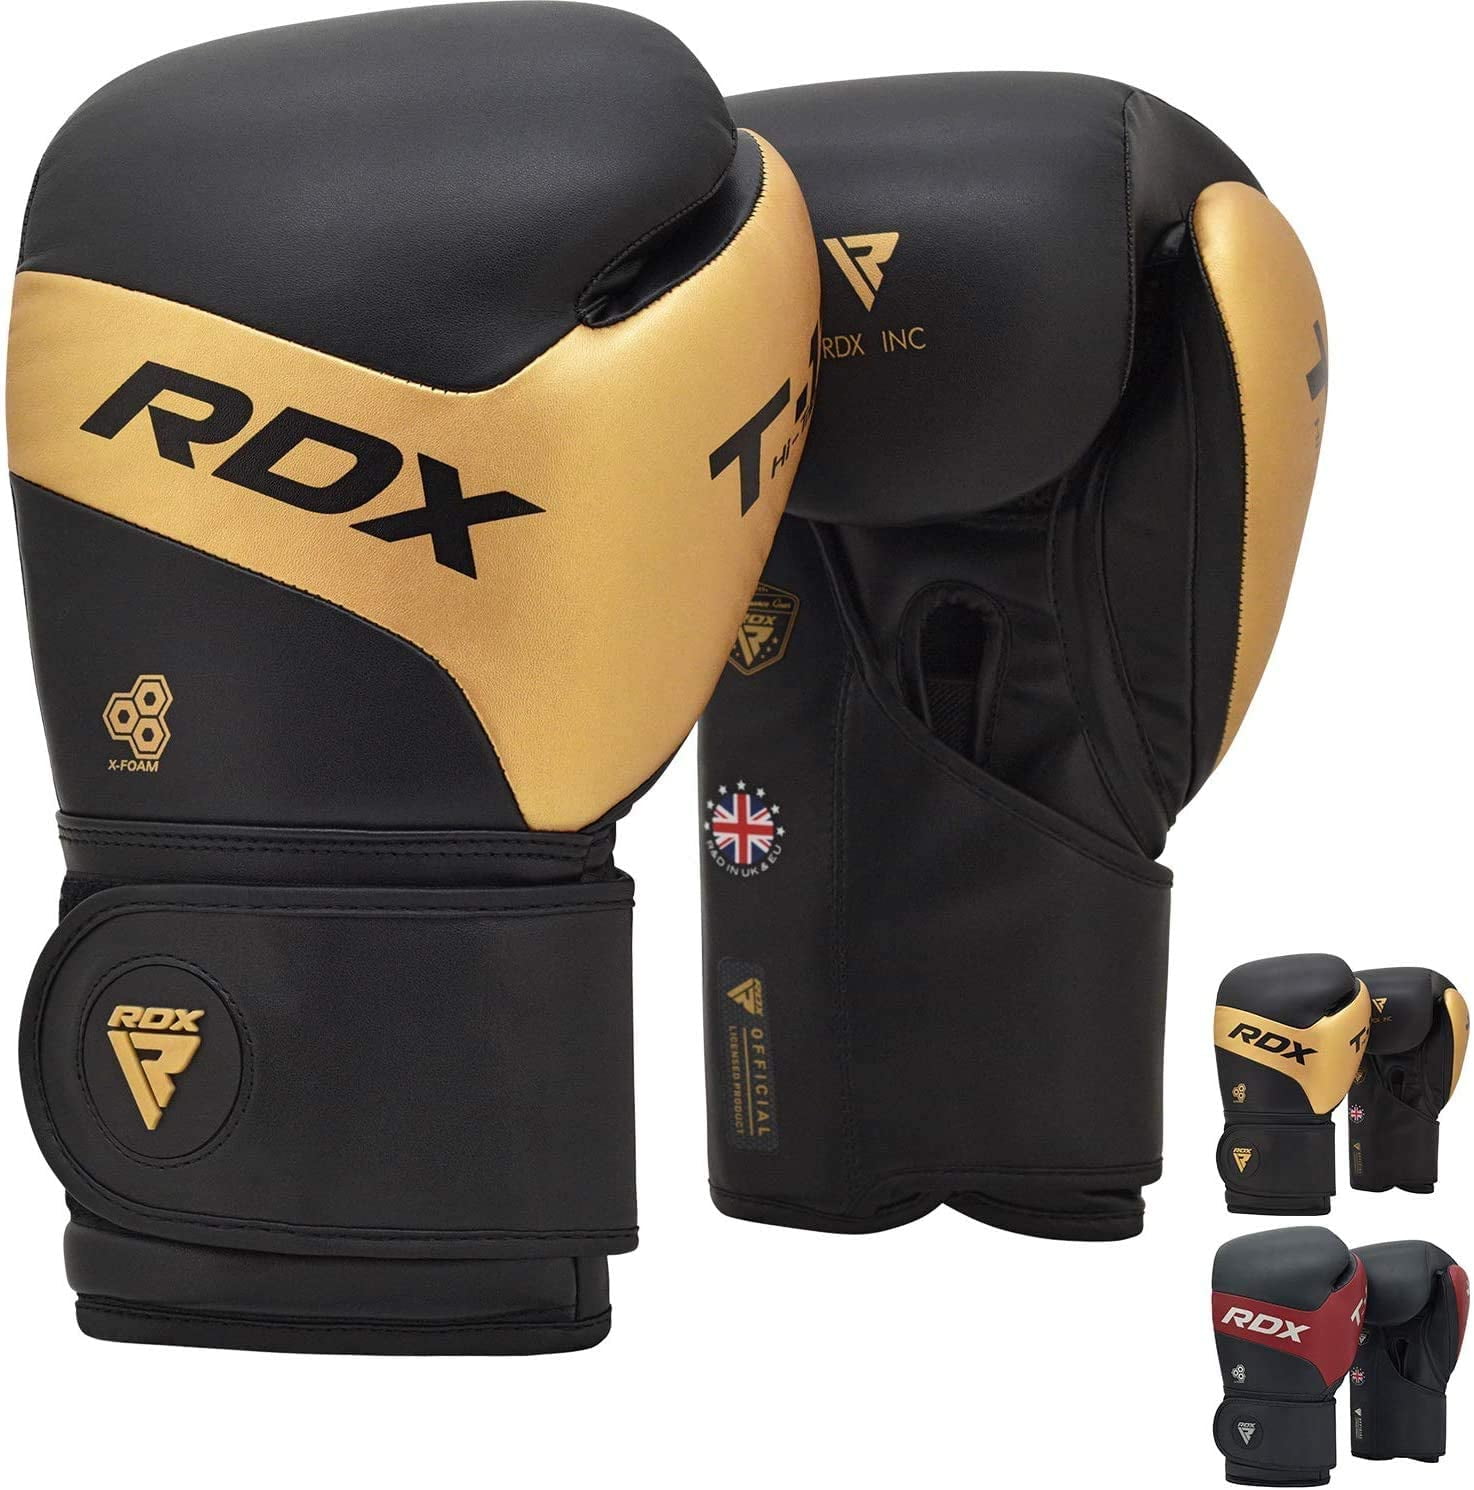 Focus Mitts Pads Double end Ball Punching Workout Kickboxing MMA Fight Training RDX Women Boxing Gloves Sparring Muay Thai Ventilated Palm KARA Patent Pending Punch Bag Premium Maya Hide Leather 